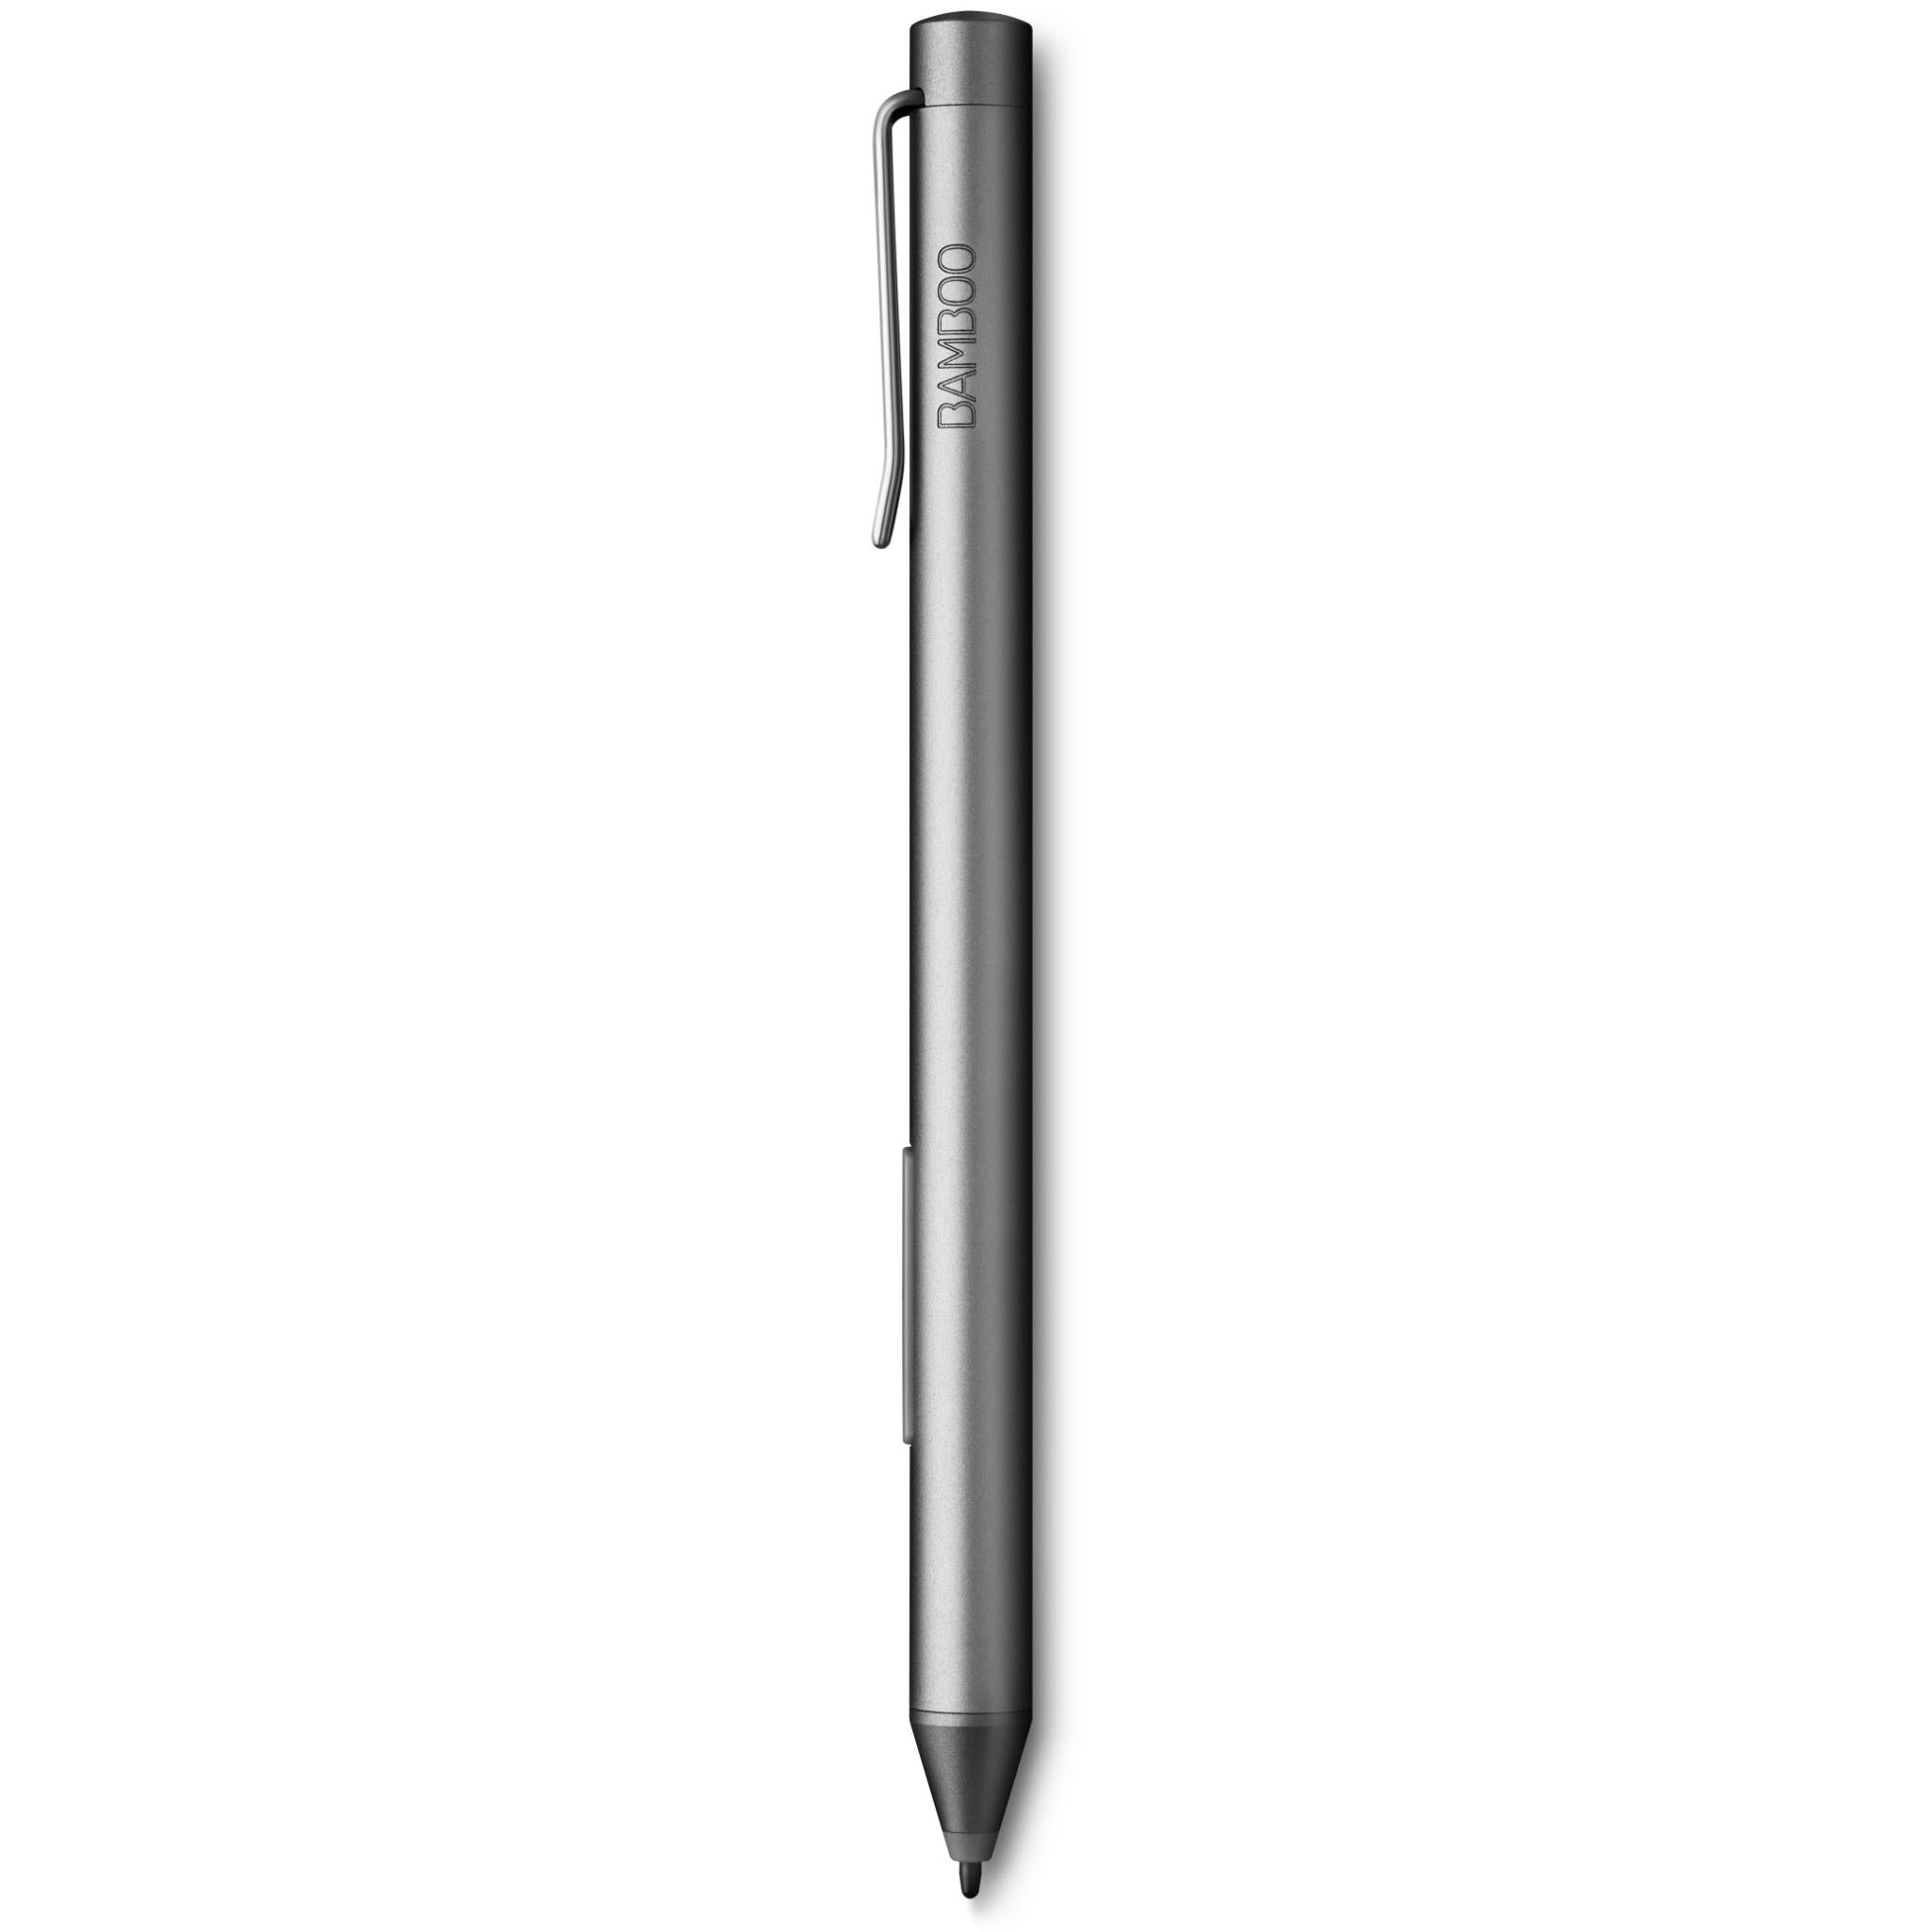 Wacom Graphics Drawing Tablet from 3995 Shipped on Amazon or Walmartcom  Regularly 70  Hip2Save